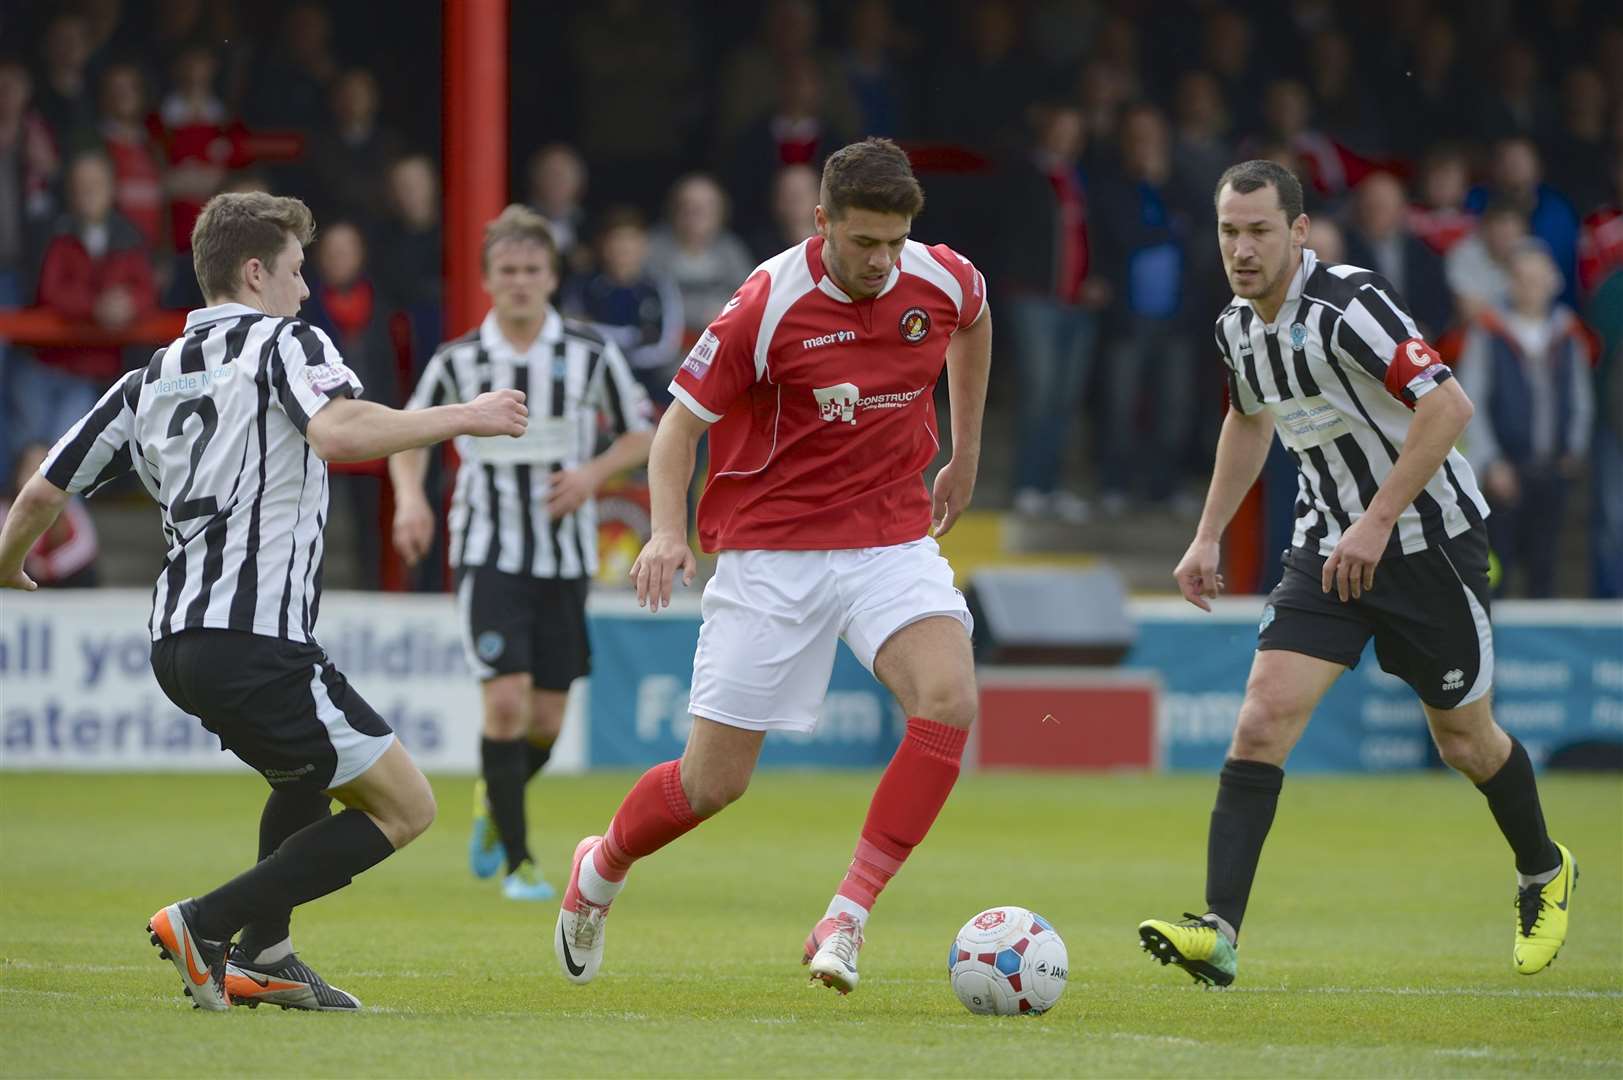 Michael Thalassitis on the ball for Ebbsfleet Picture: Andy Payton